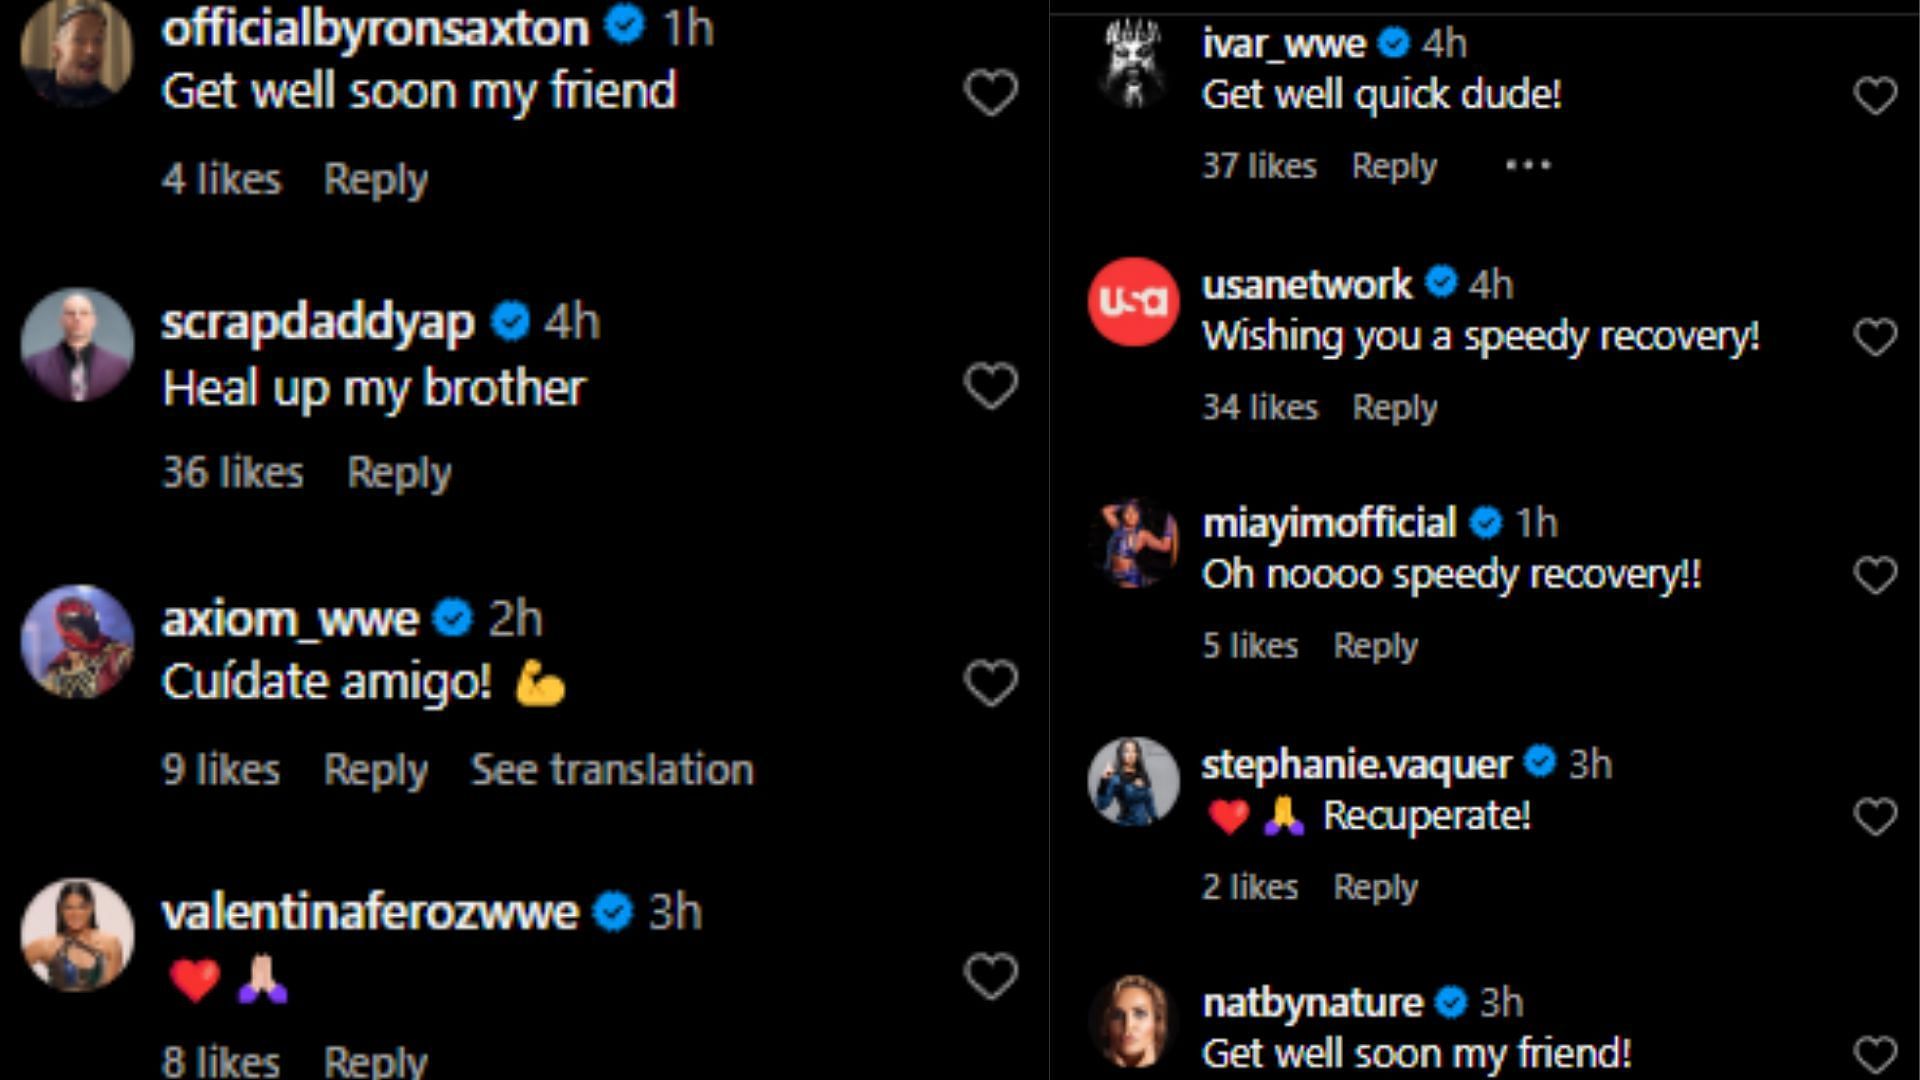 Multiple stars have shared their well wishes with him